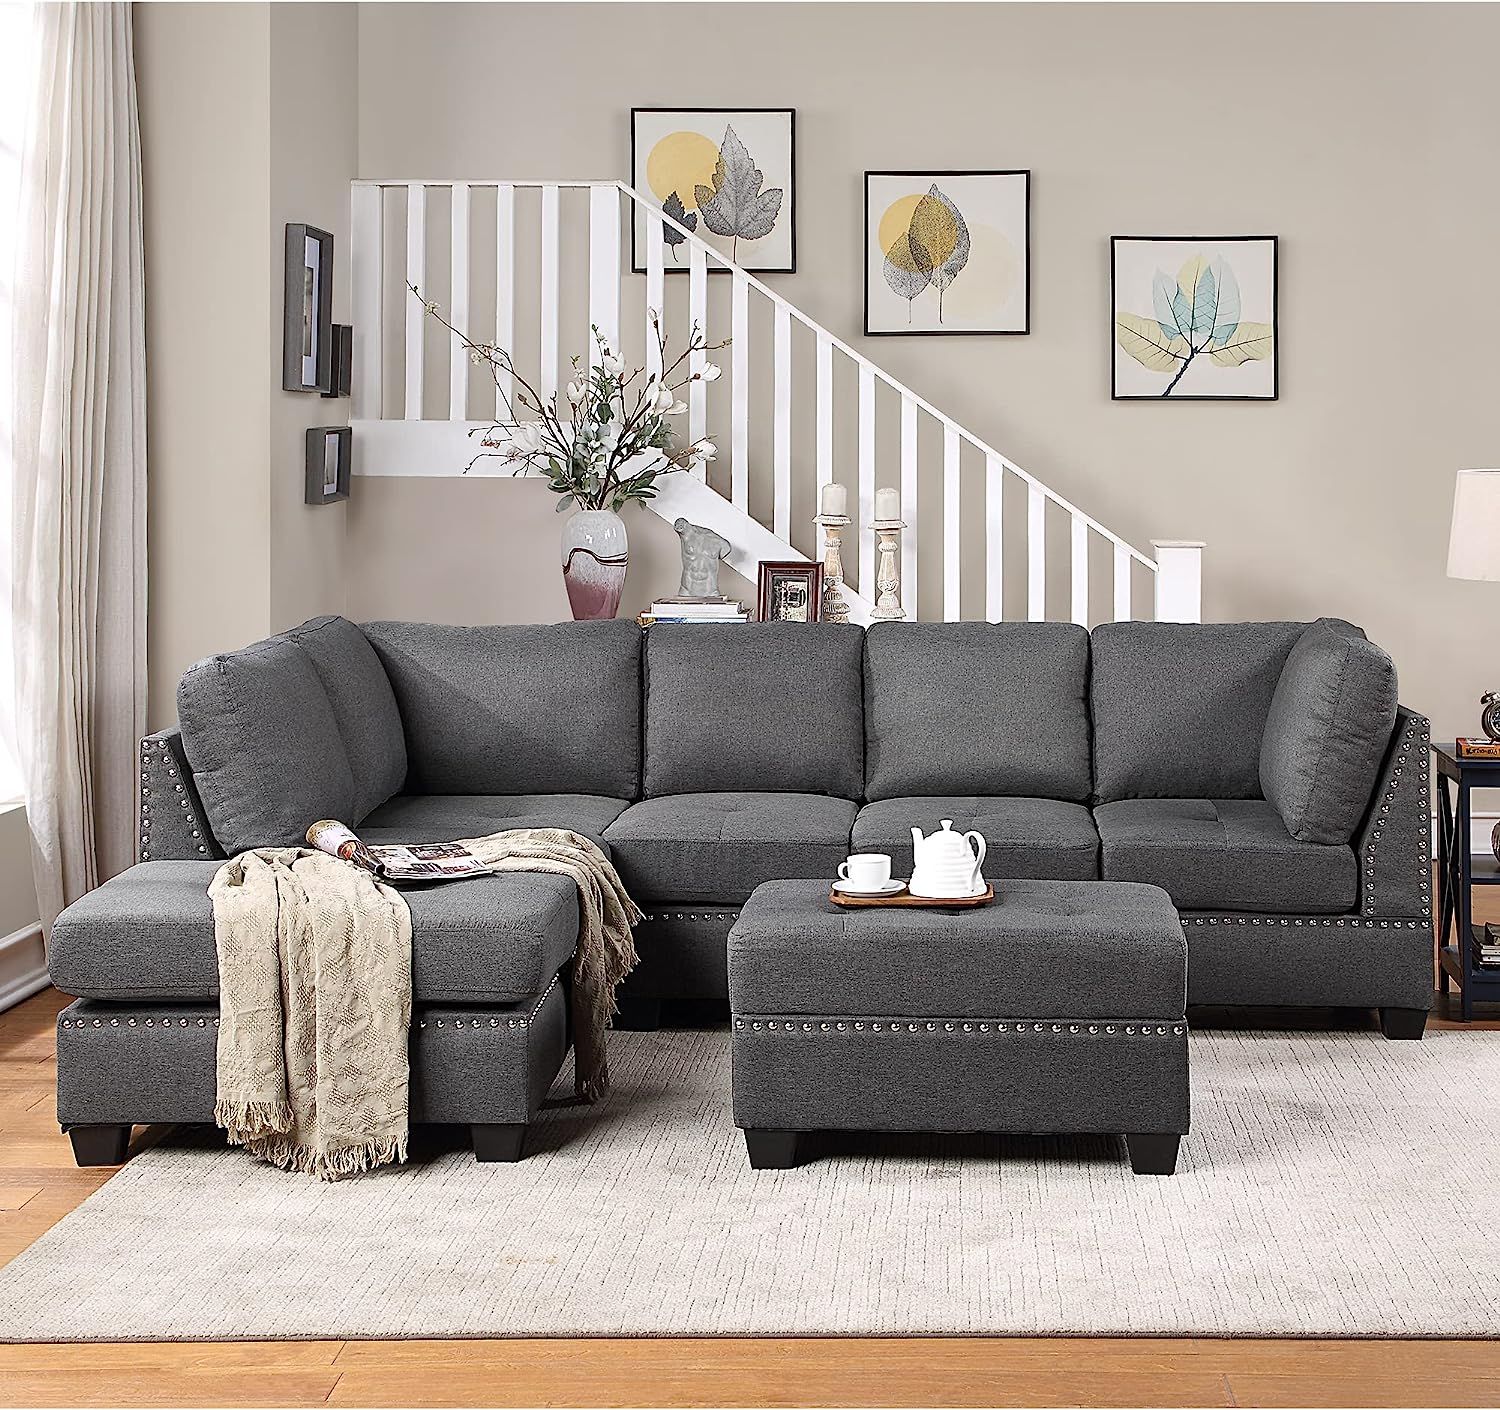 Dhhu Fine Sectional, Reversible Chaise, L Shaped Couch Sofa With Ottoman  For Living Room, Apartment, Office, Gray, Black Funiture Sets –  Chpstampsonus Within L Shape Couches With Reversible Chaises (View 15 of 15)